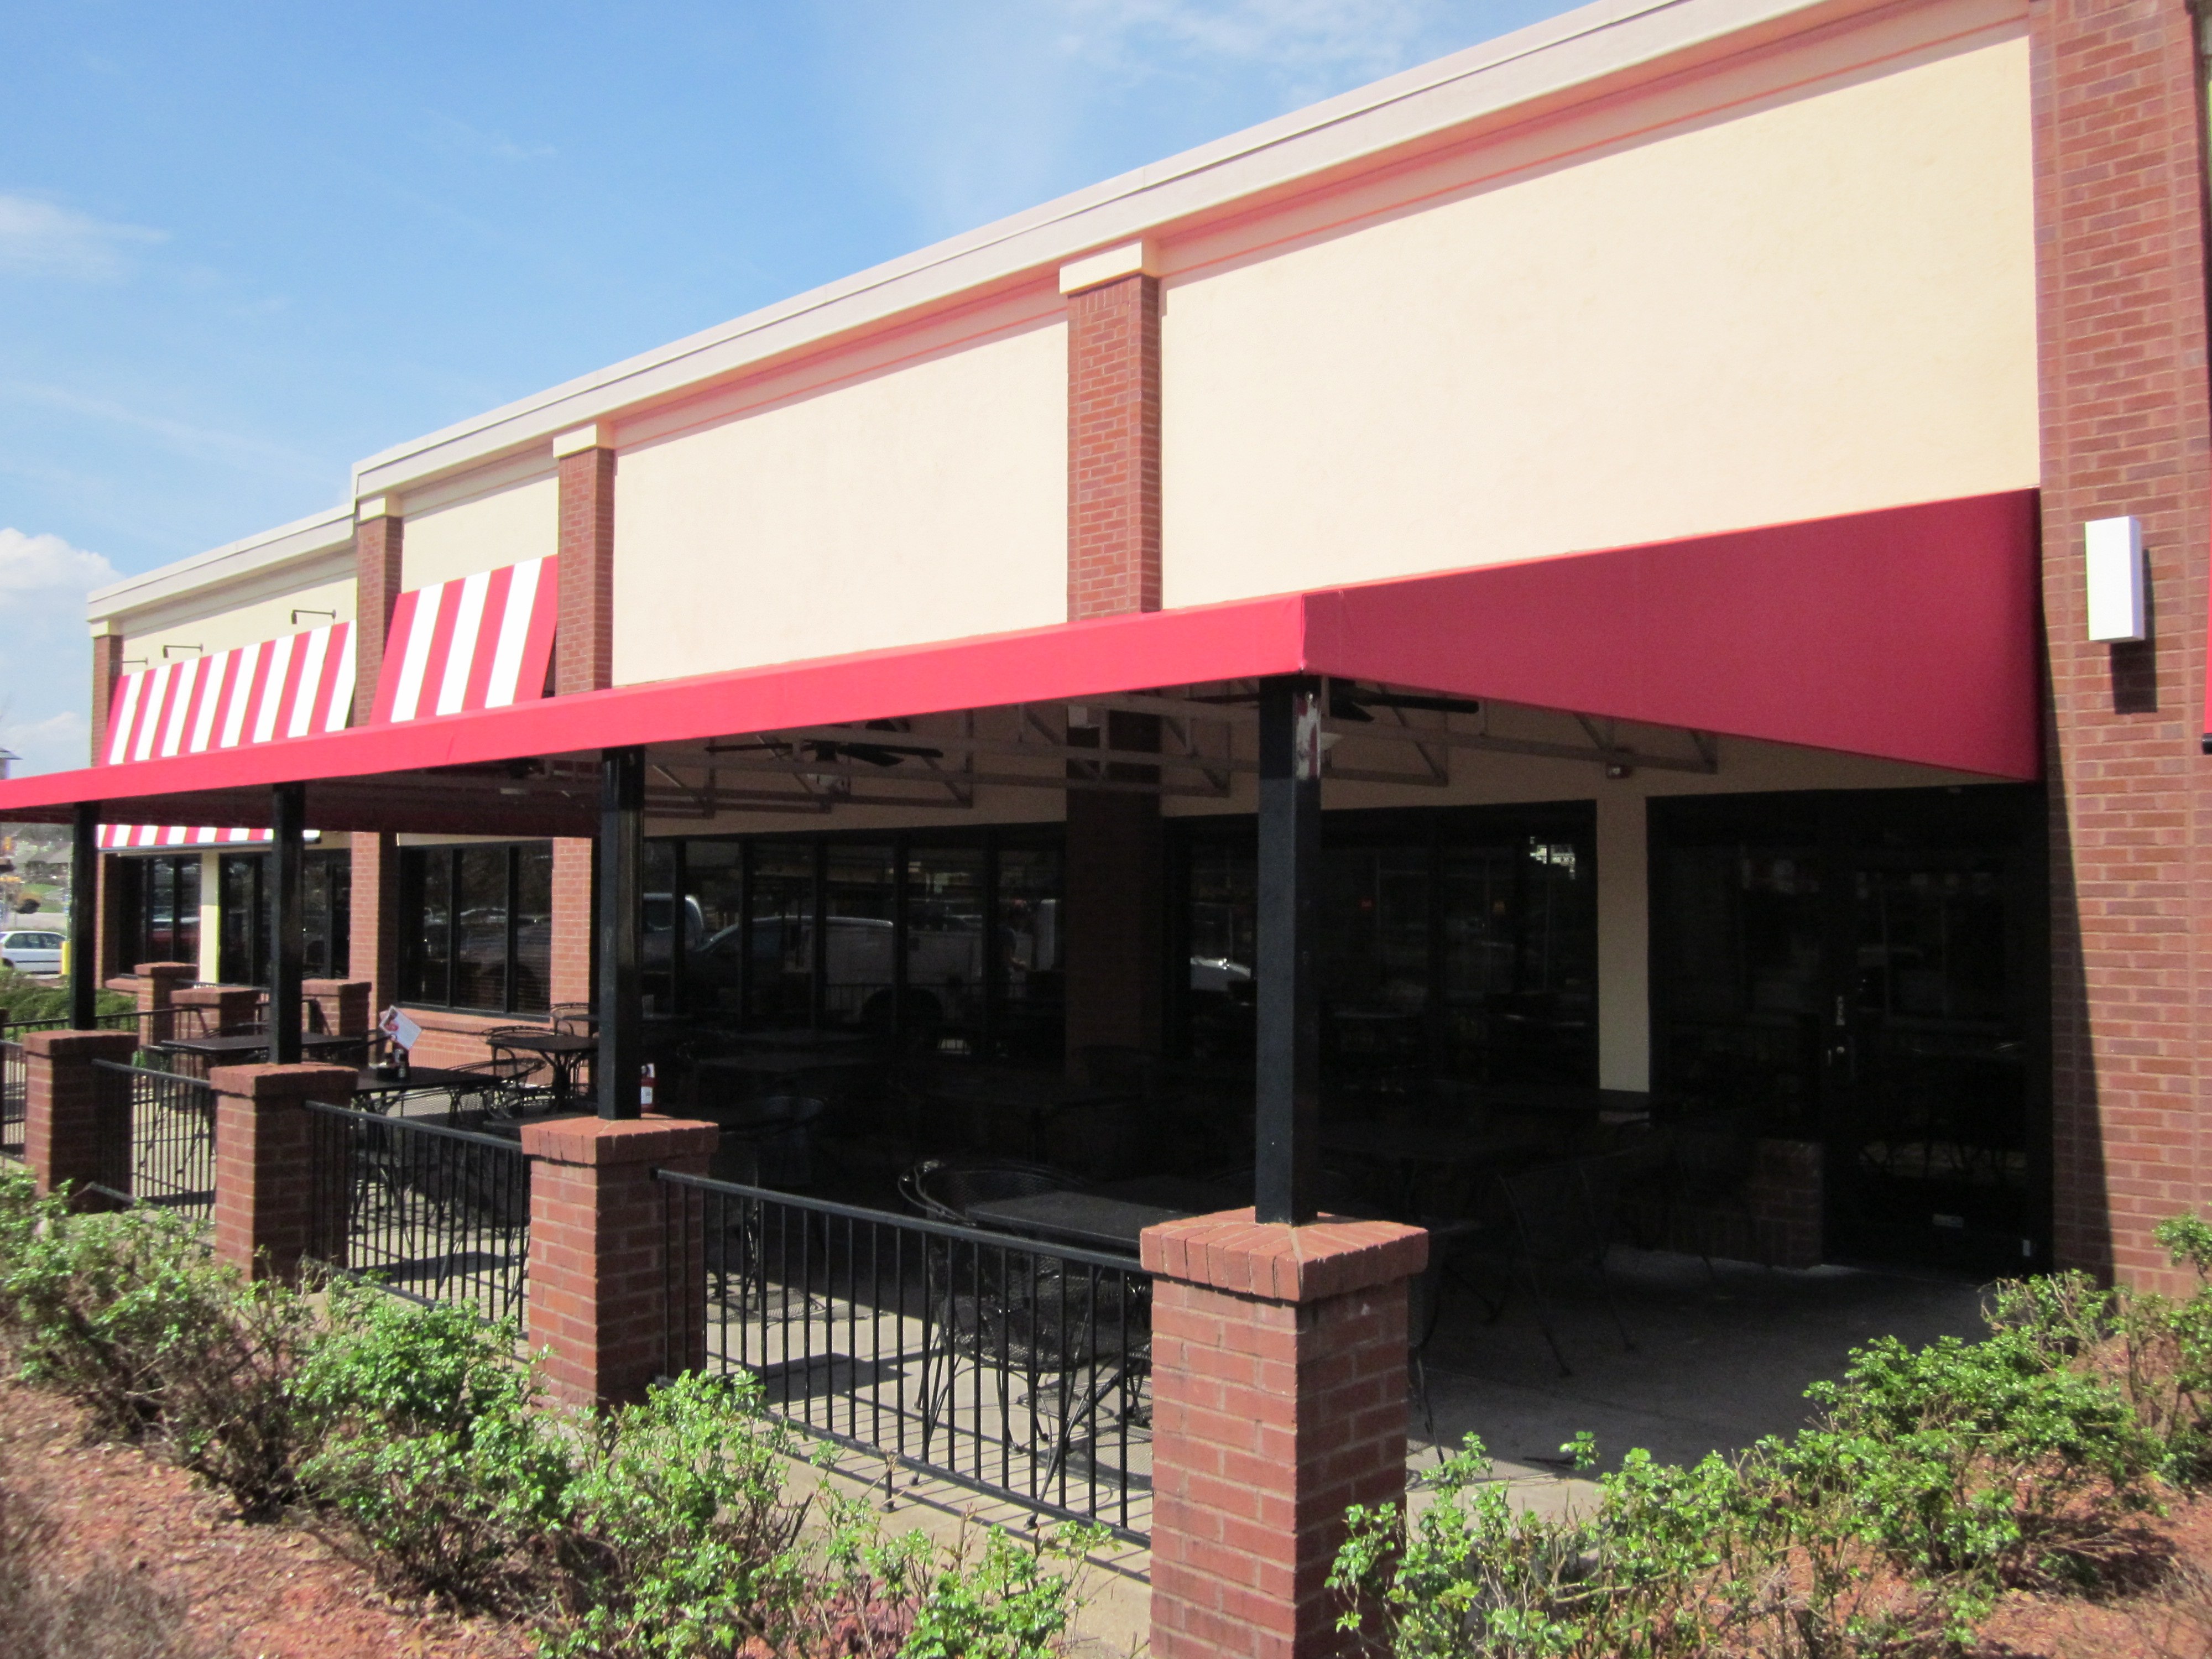 The Benefits Of Constructing Canopies For Buildings Queen City Awning